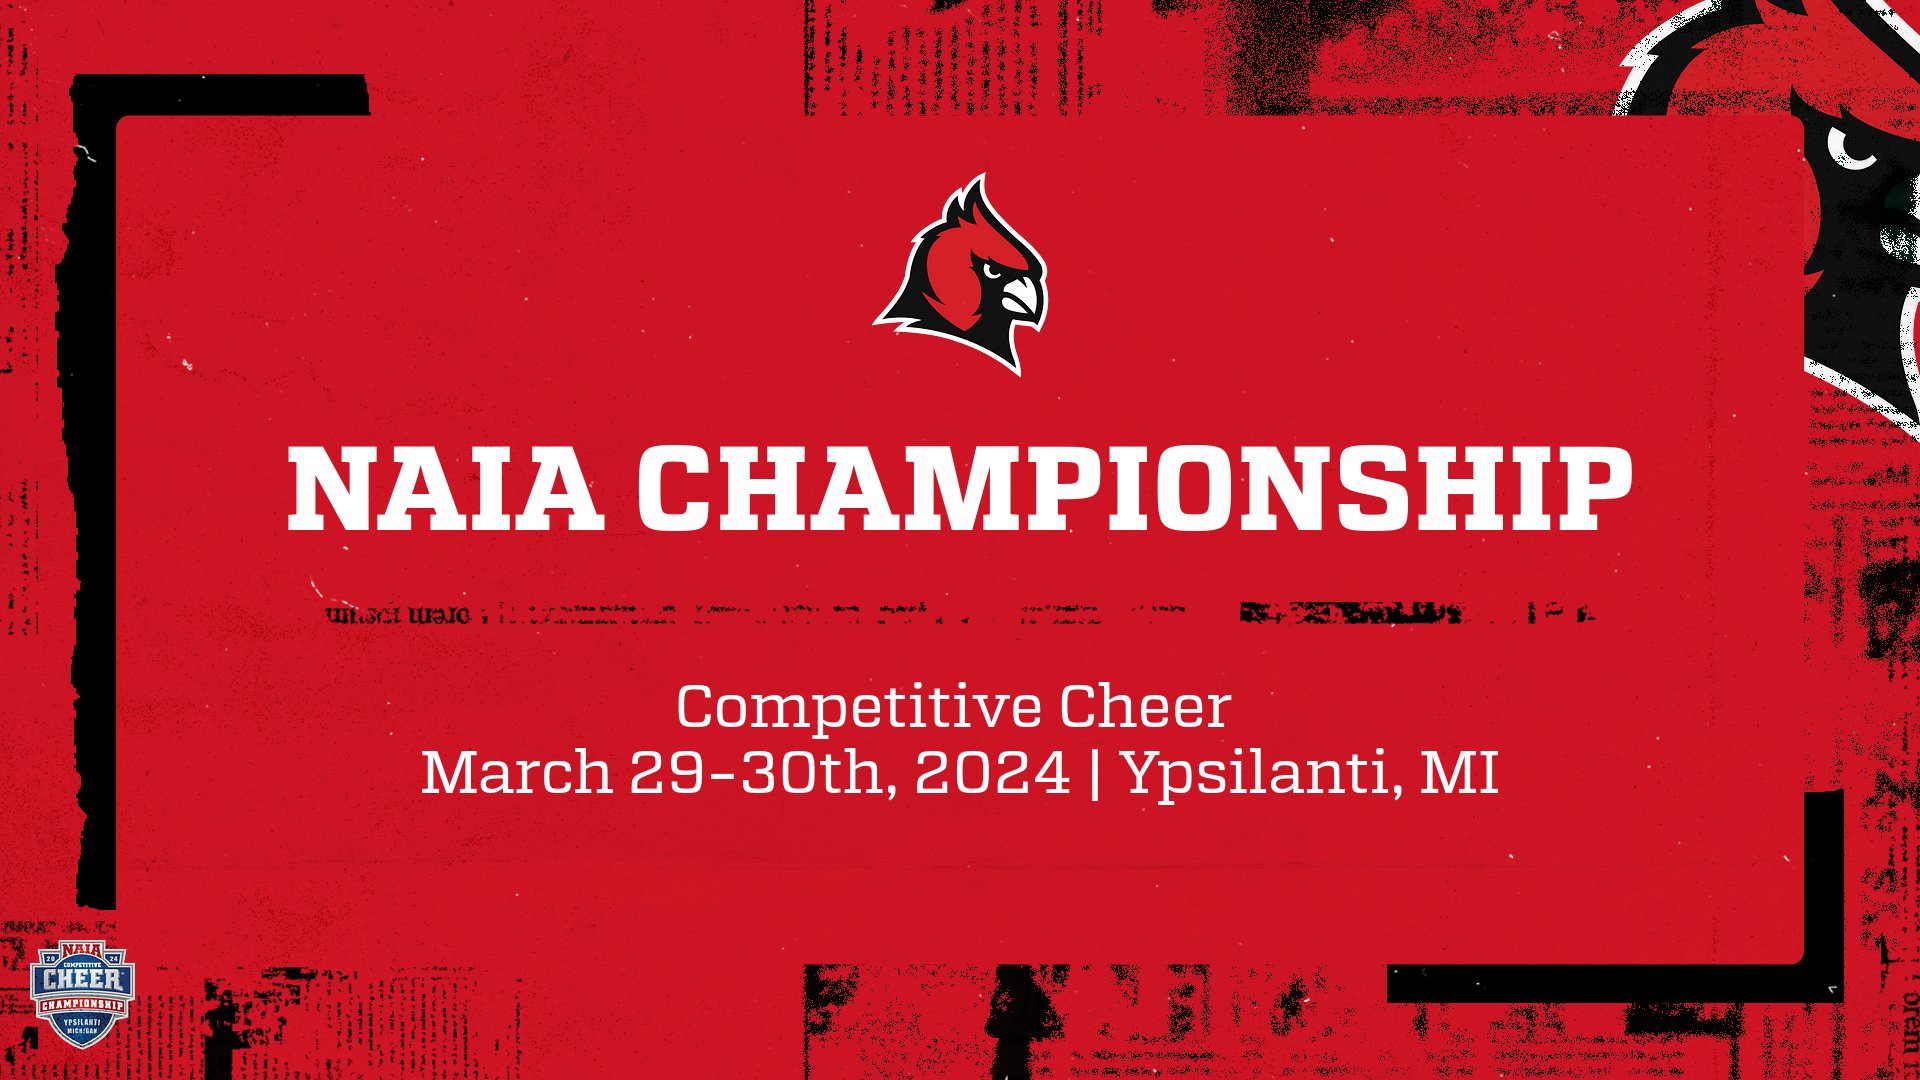 NAIA CHAMPIONSHIP PREVIEW: Cheer set for eighth straight appearance in NAIA National Championships